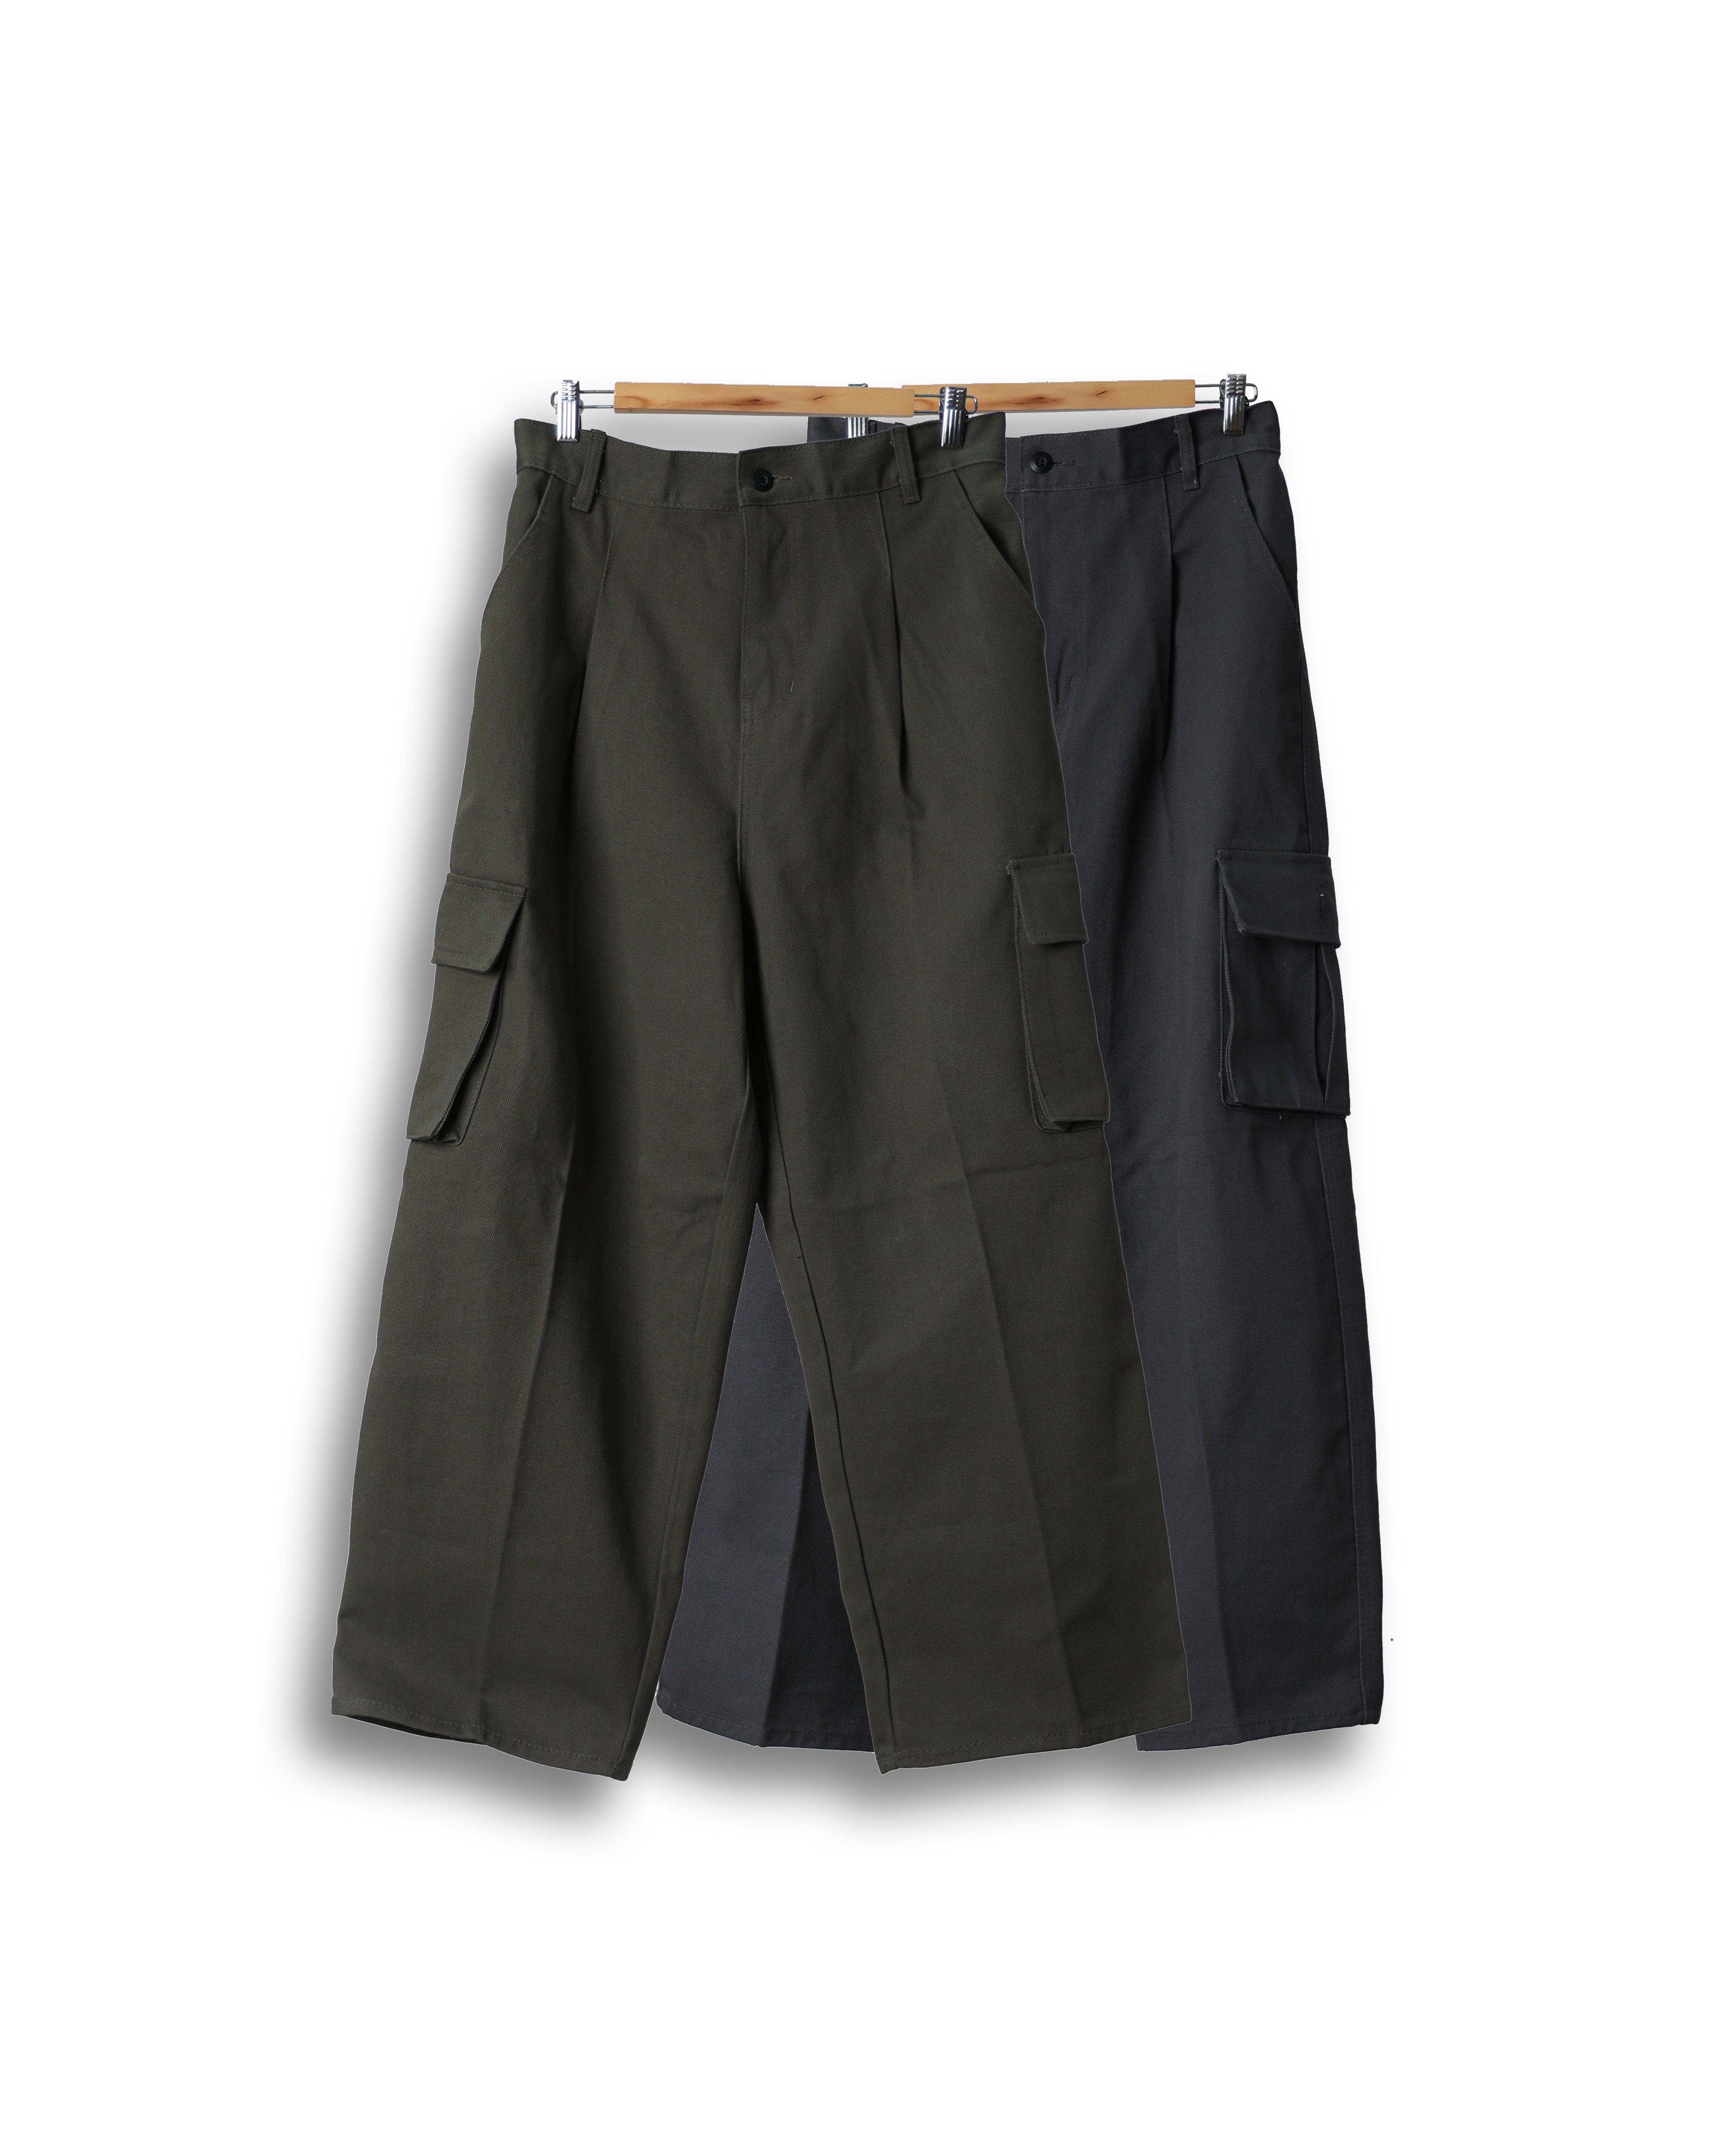 WOT Heavy Cotton Work Cargo Pants (Charcoal/Olive)